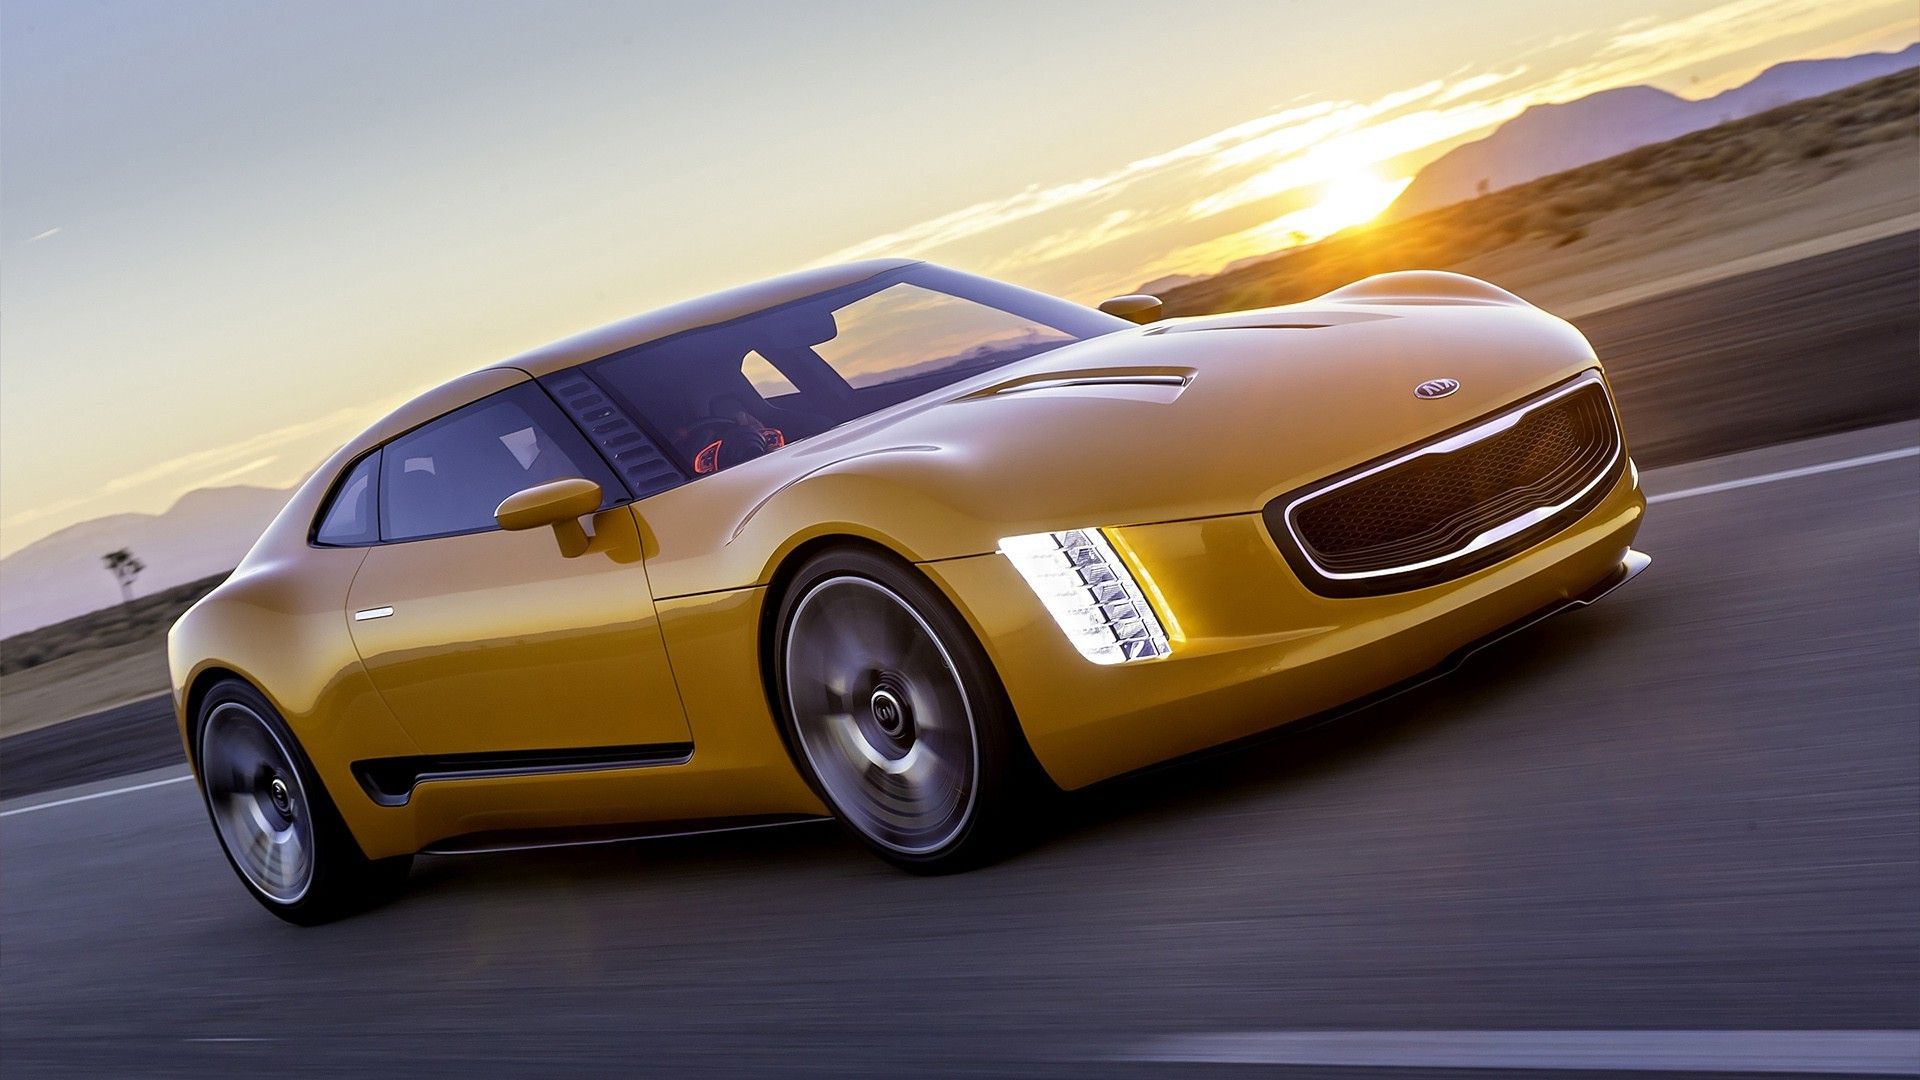 Kia Car 2560x1600 Resolution HD 4k Wallpaper, Image, Background, Photo and Picture